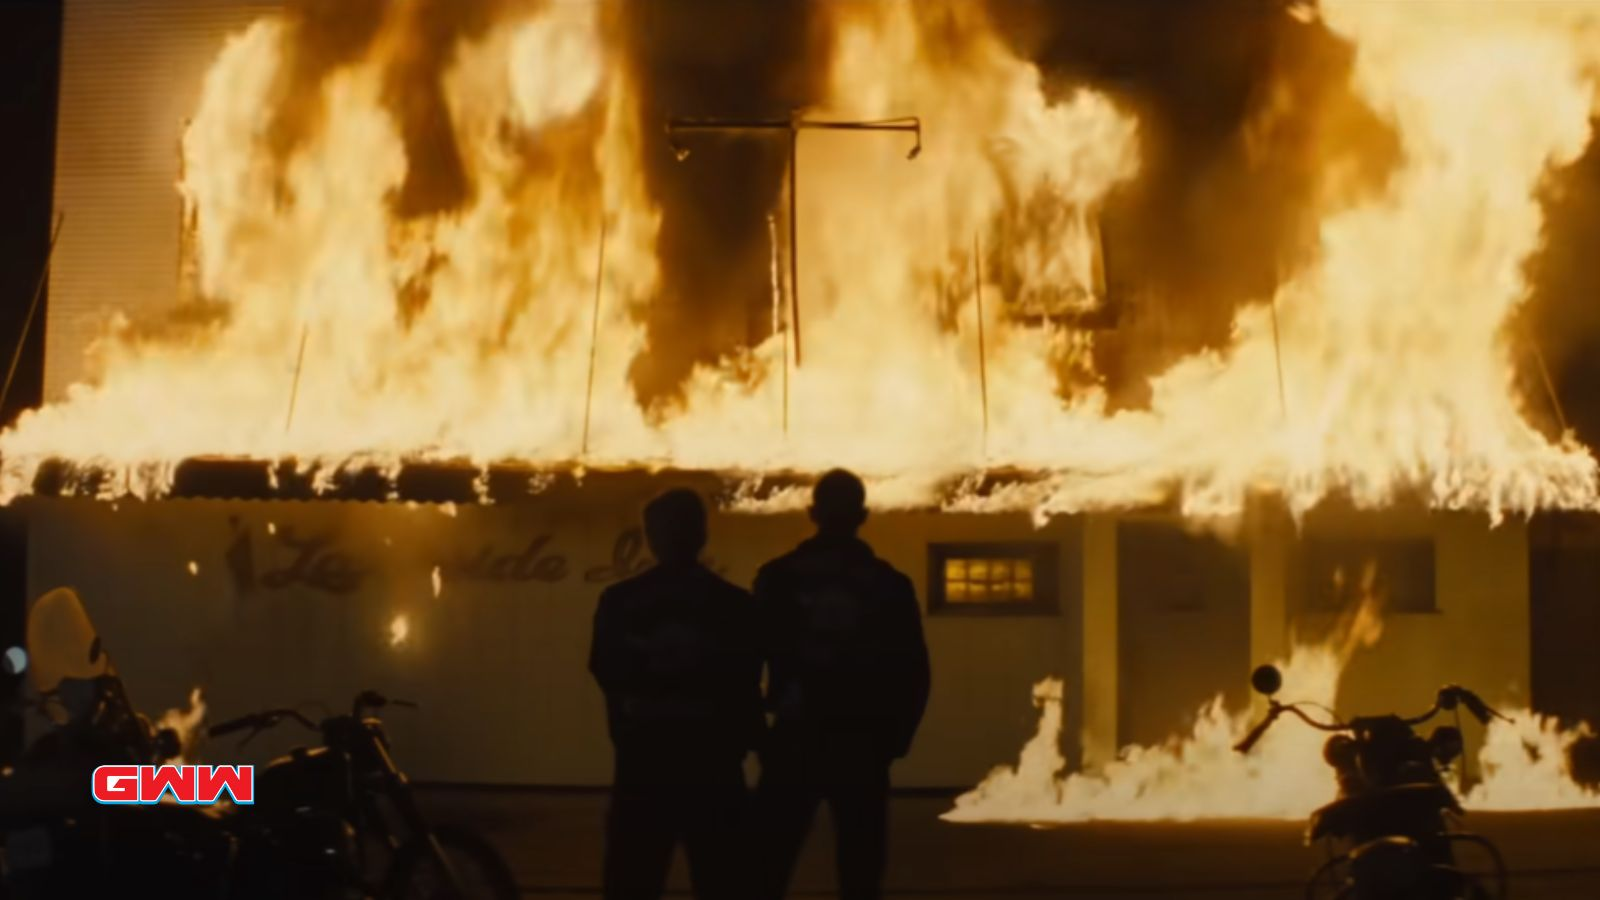 Building engulfed in flames at night, silhouettes of two people watching.